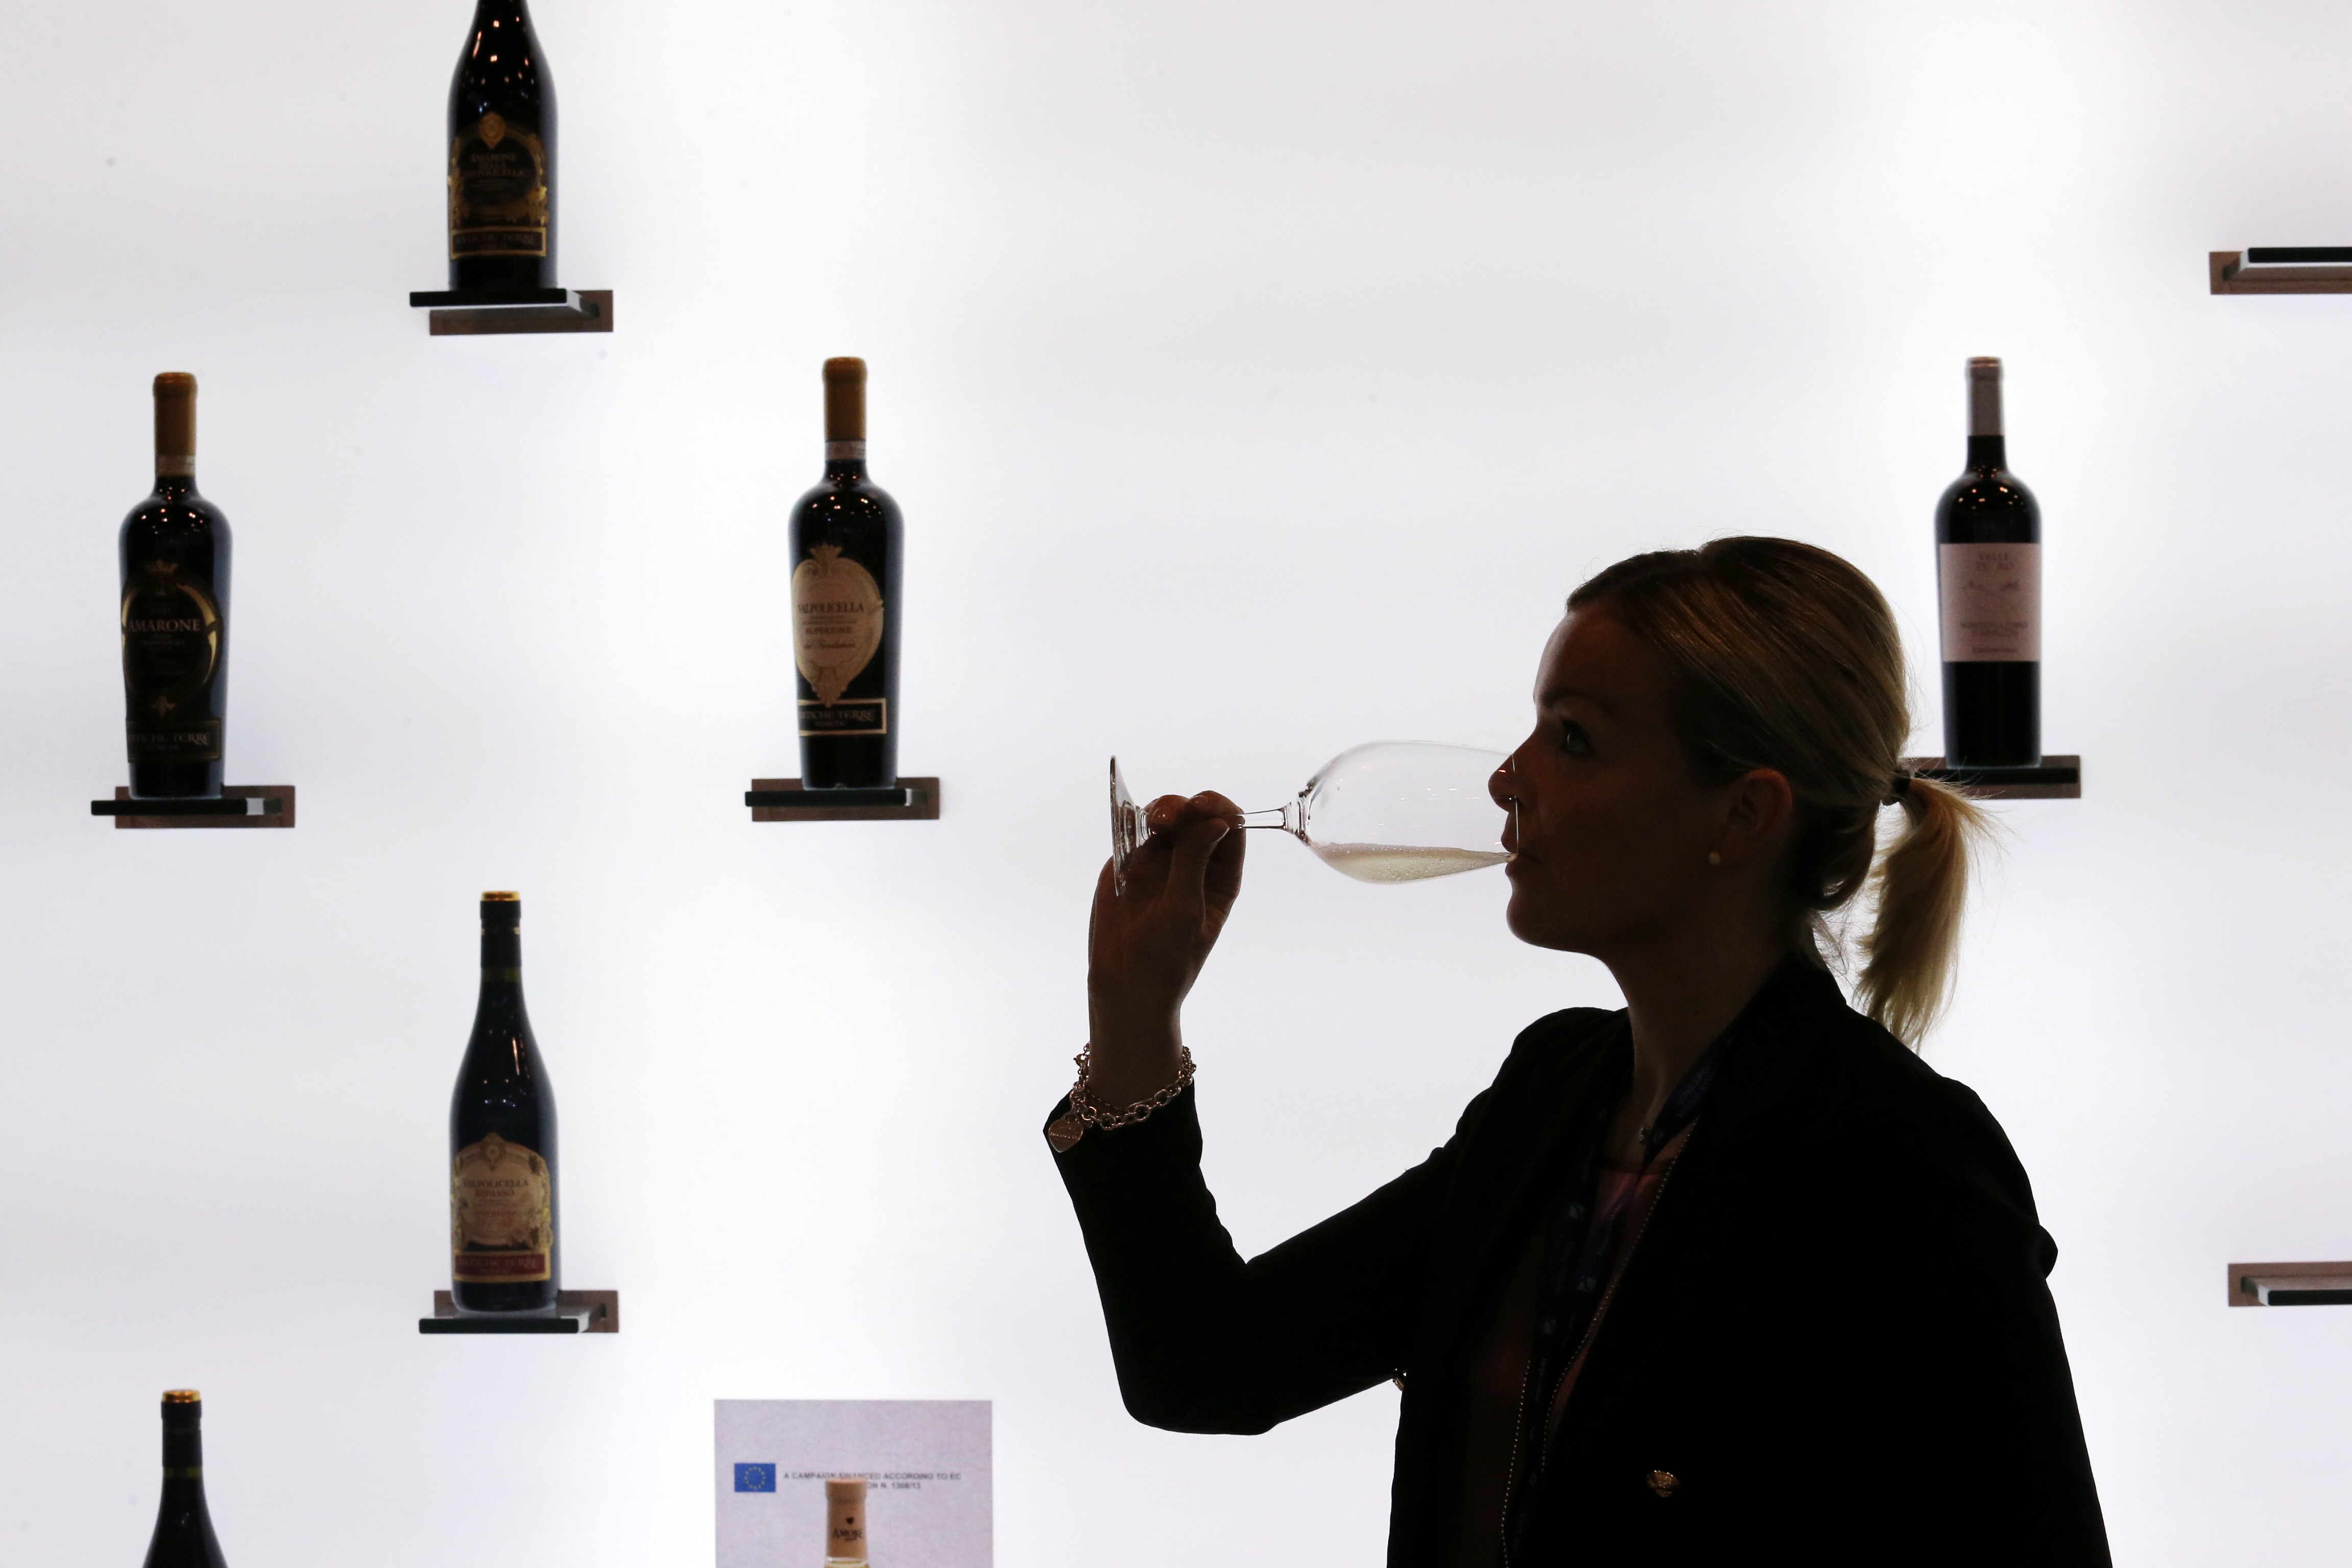 A visitor samples wine at Vinexpo, at the Hong Kong Convention and Exhibition Centre, in Wan Chai, on May 30, 2018. Hong Kong is the region’s trading hub for wines and spirits. Photo: Felix Wong